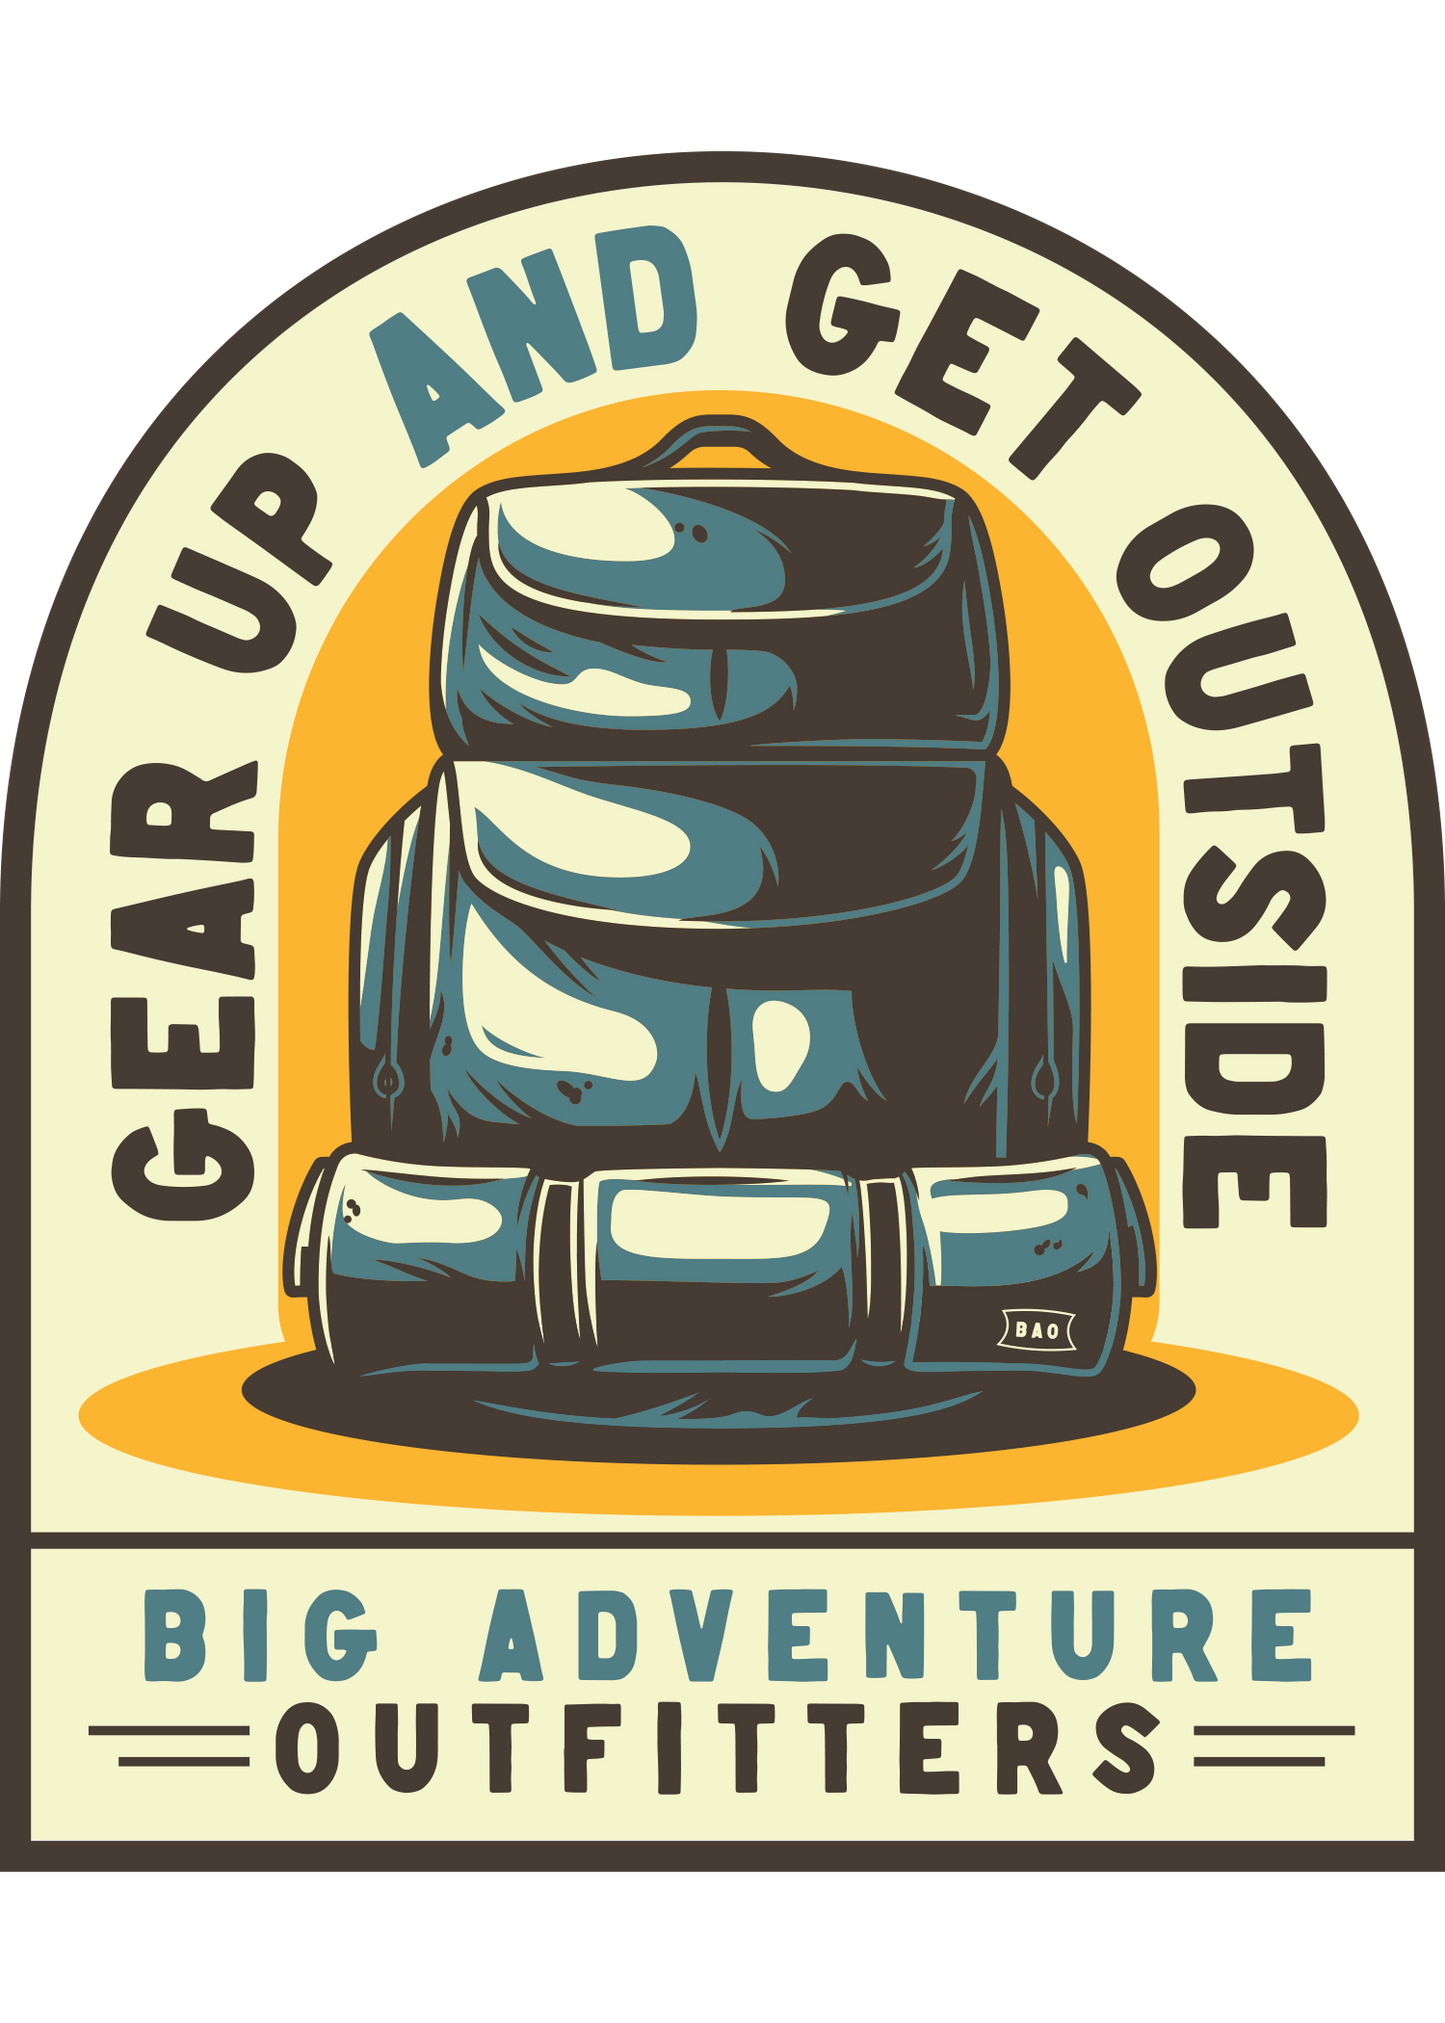 Gear Up & Get Outside Sticker Big Adventure Outfitters